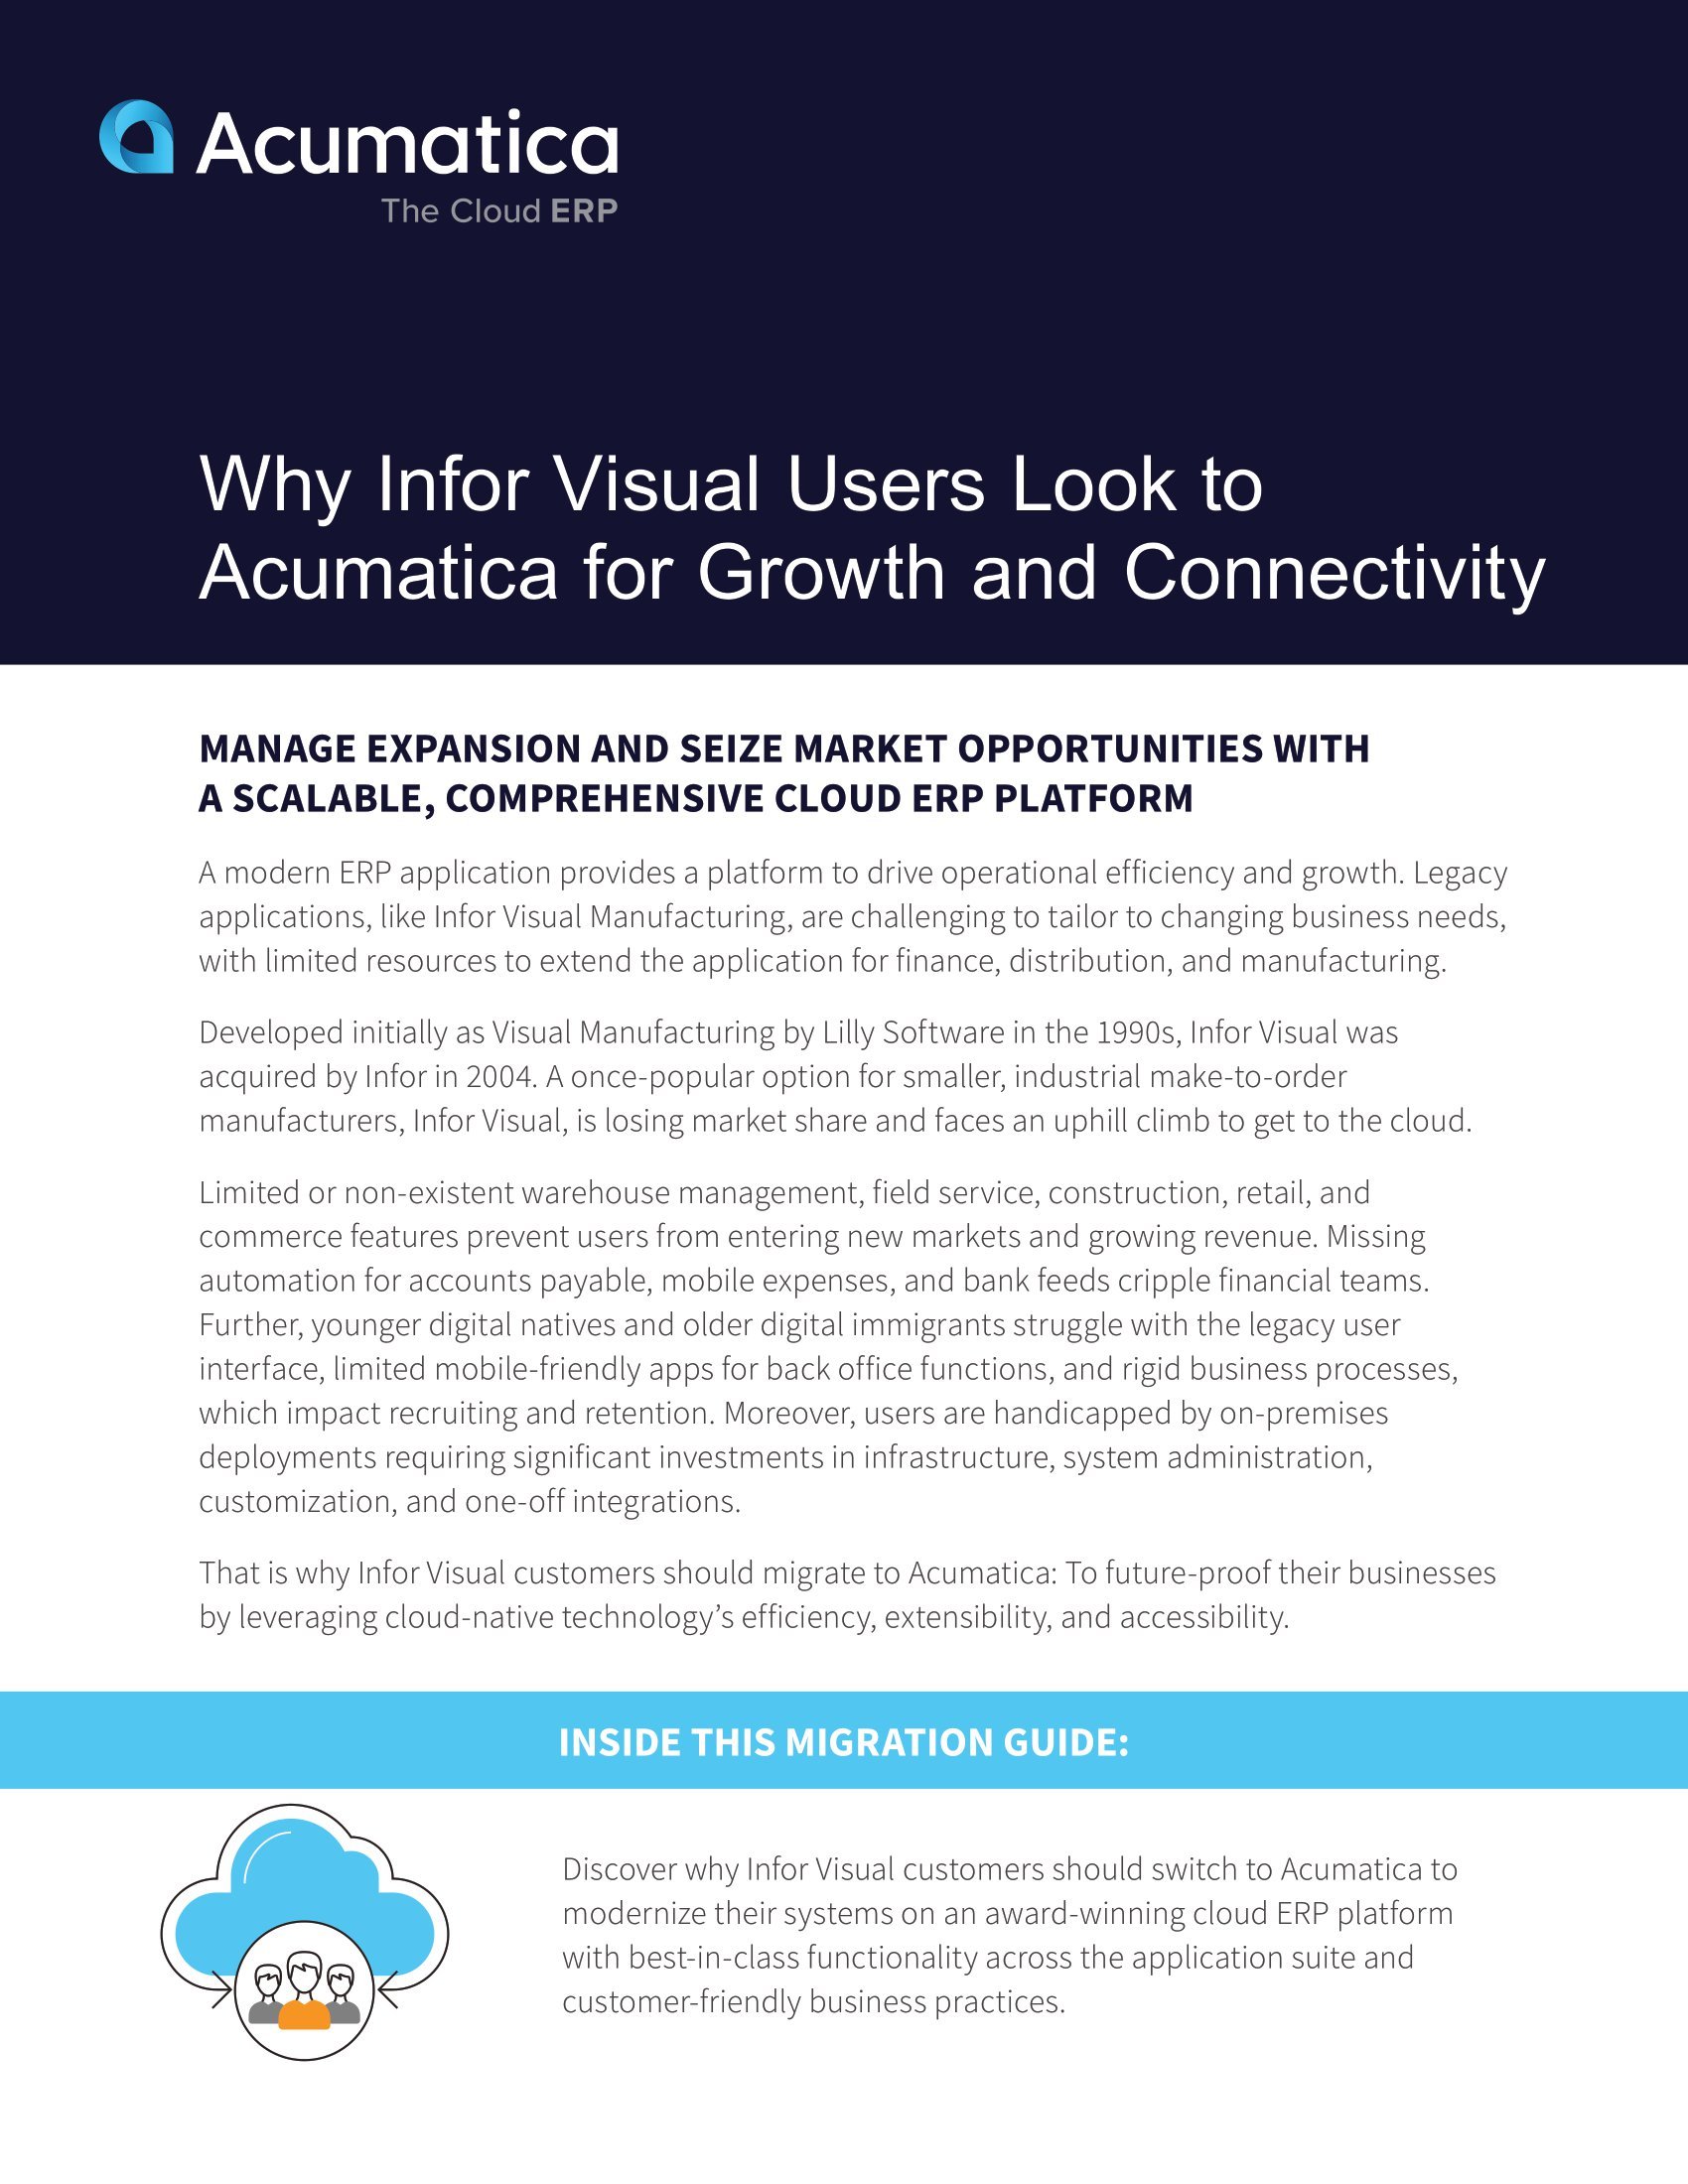 Find Out Why Manufacturers Should Choose Acumatica With A Free Infor Visual Migration Guide